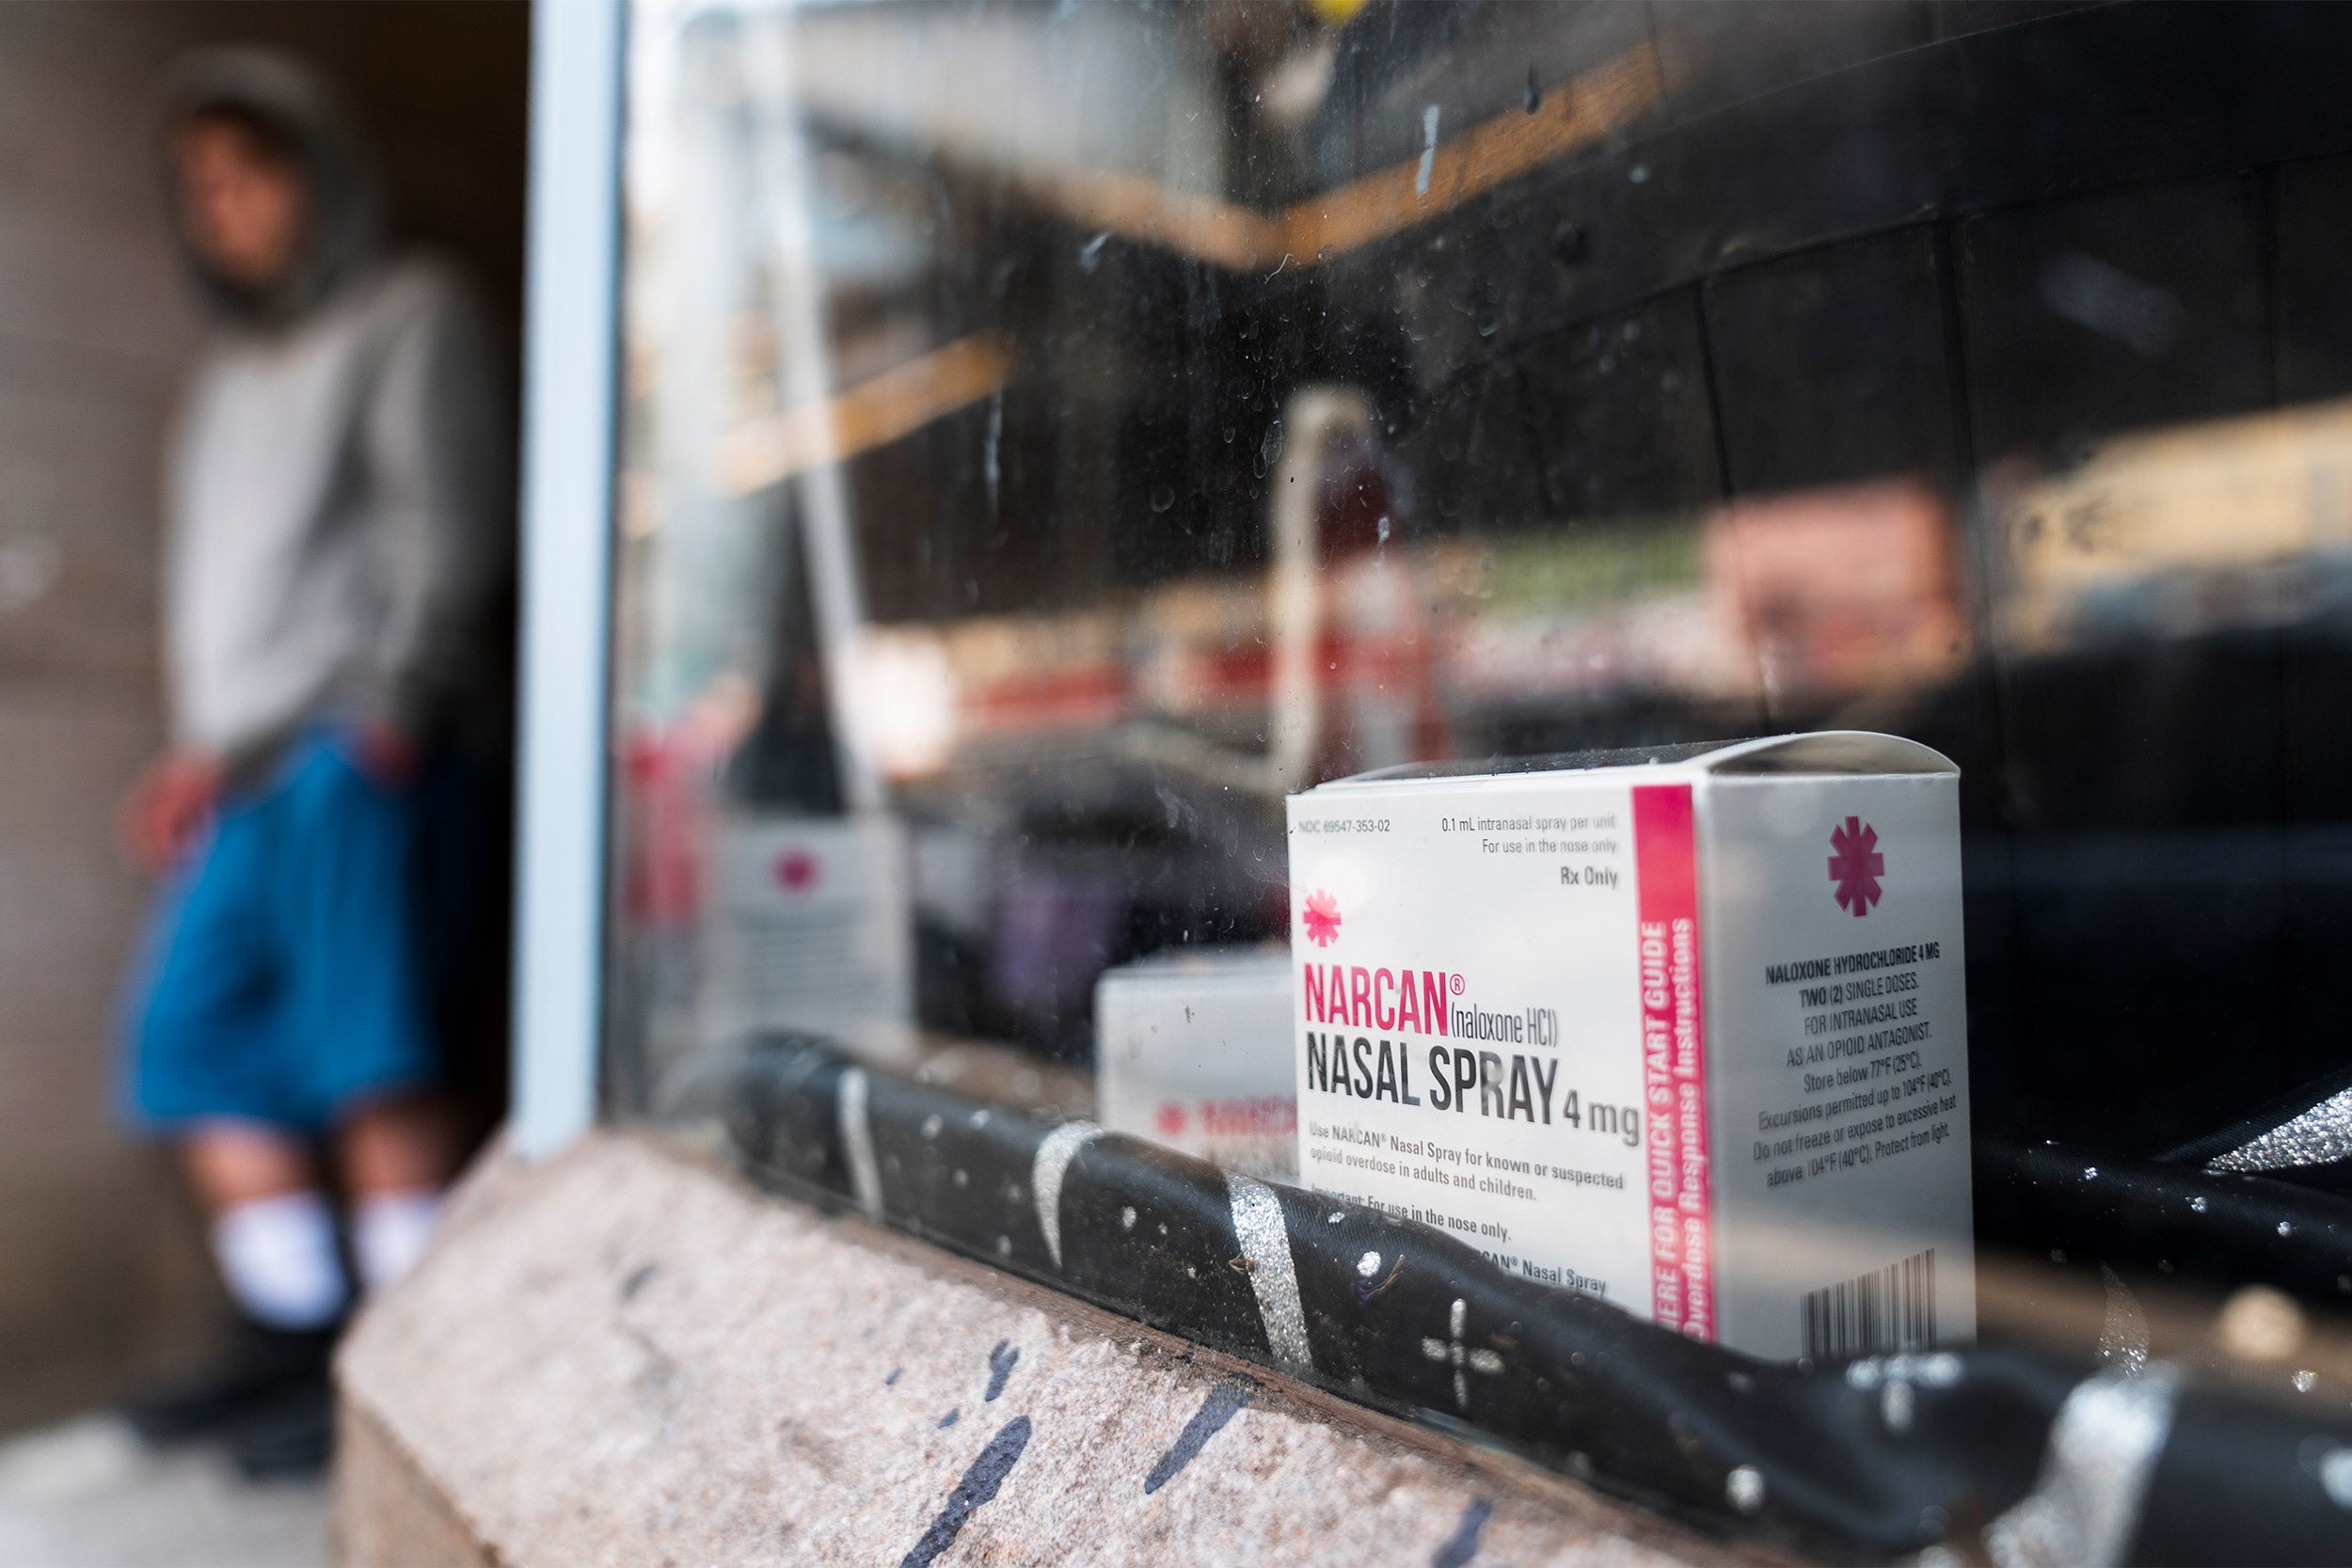 A box of Narcan sits on a shelf.